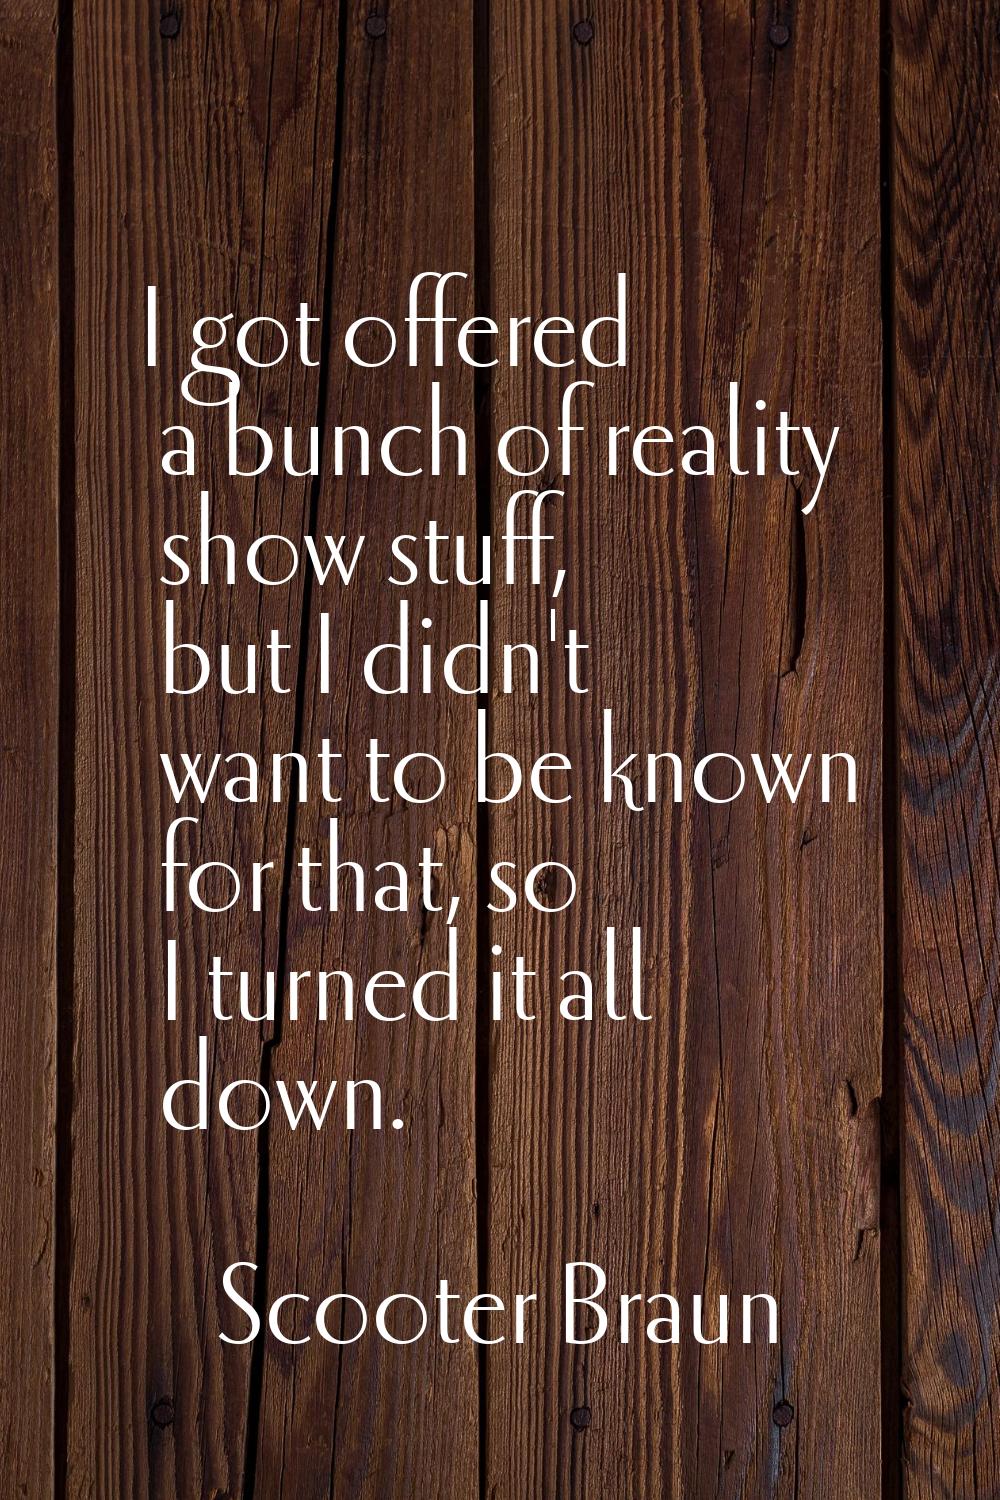 I got offered a bunch of reality show stuff, but I didn't want to be known for that, so I turned it